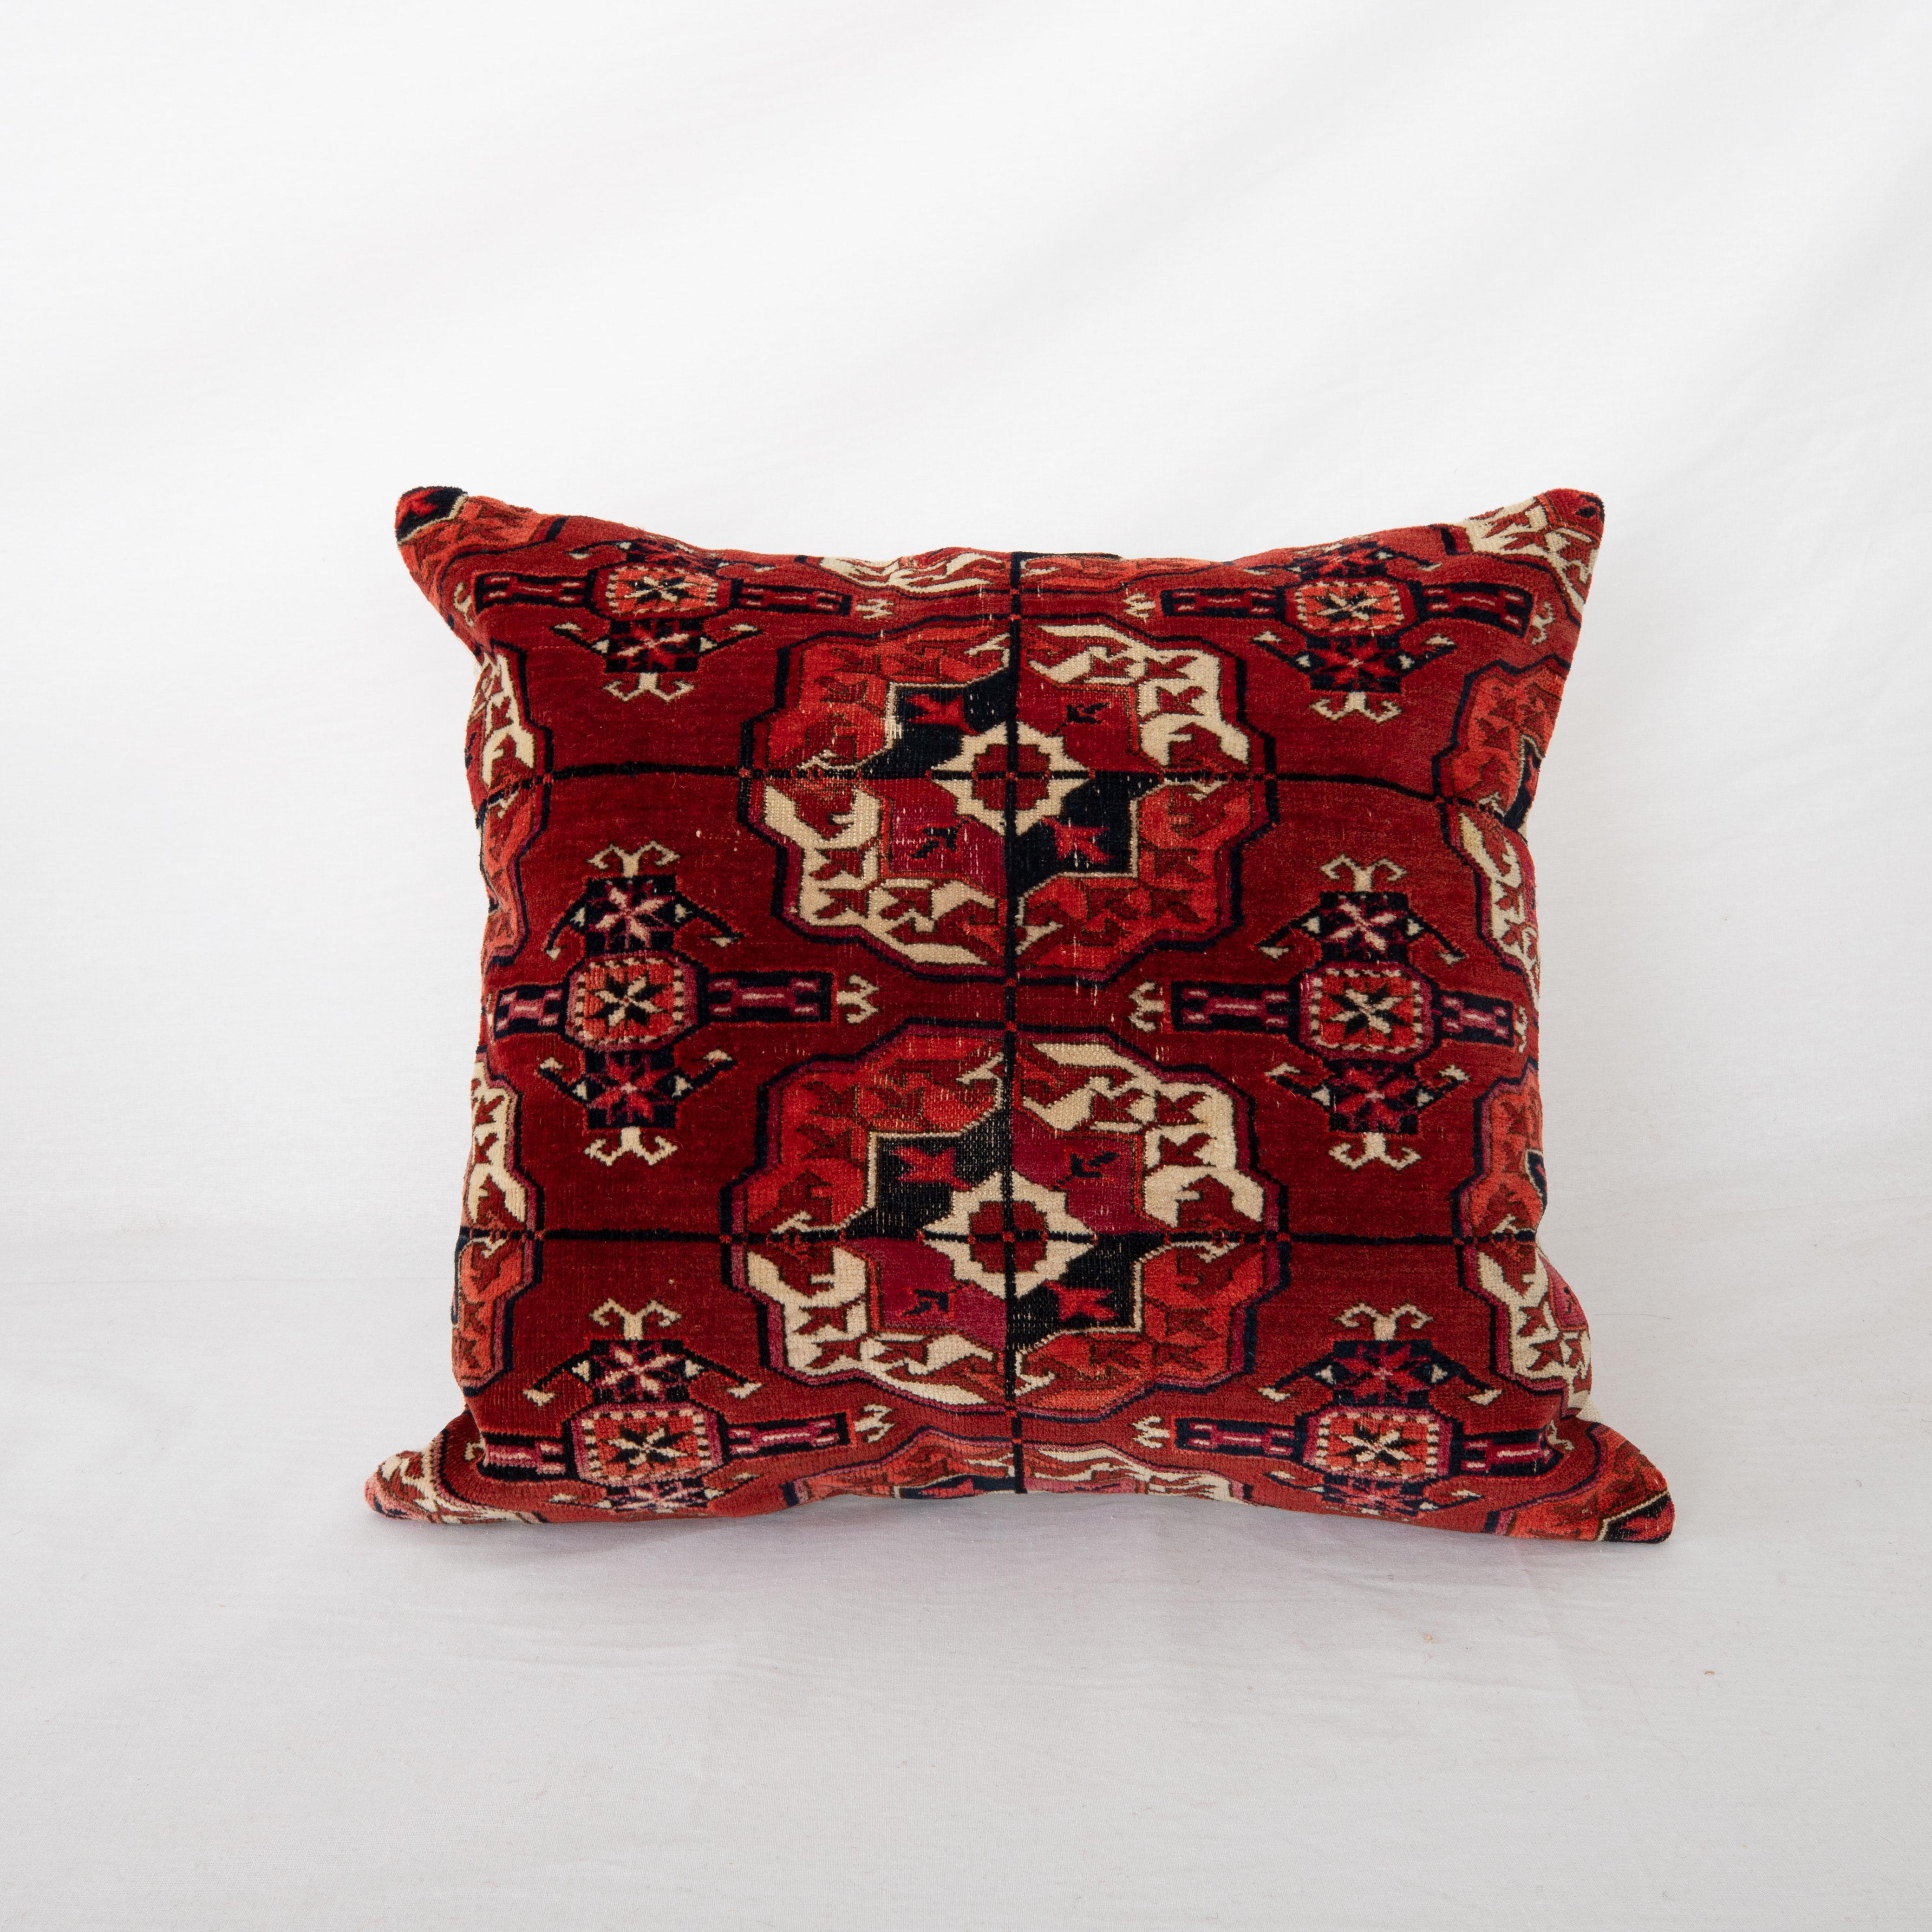 Pillowcase is made from an antique Turkmen, Tekke tribe main rug fragment dating back to 1860s.

It does not come with an insert but a bag made to size to accommodate insert materials.
Linen in the back.
Zipper closure.
Dry clean is